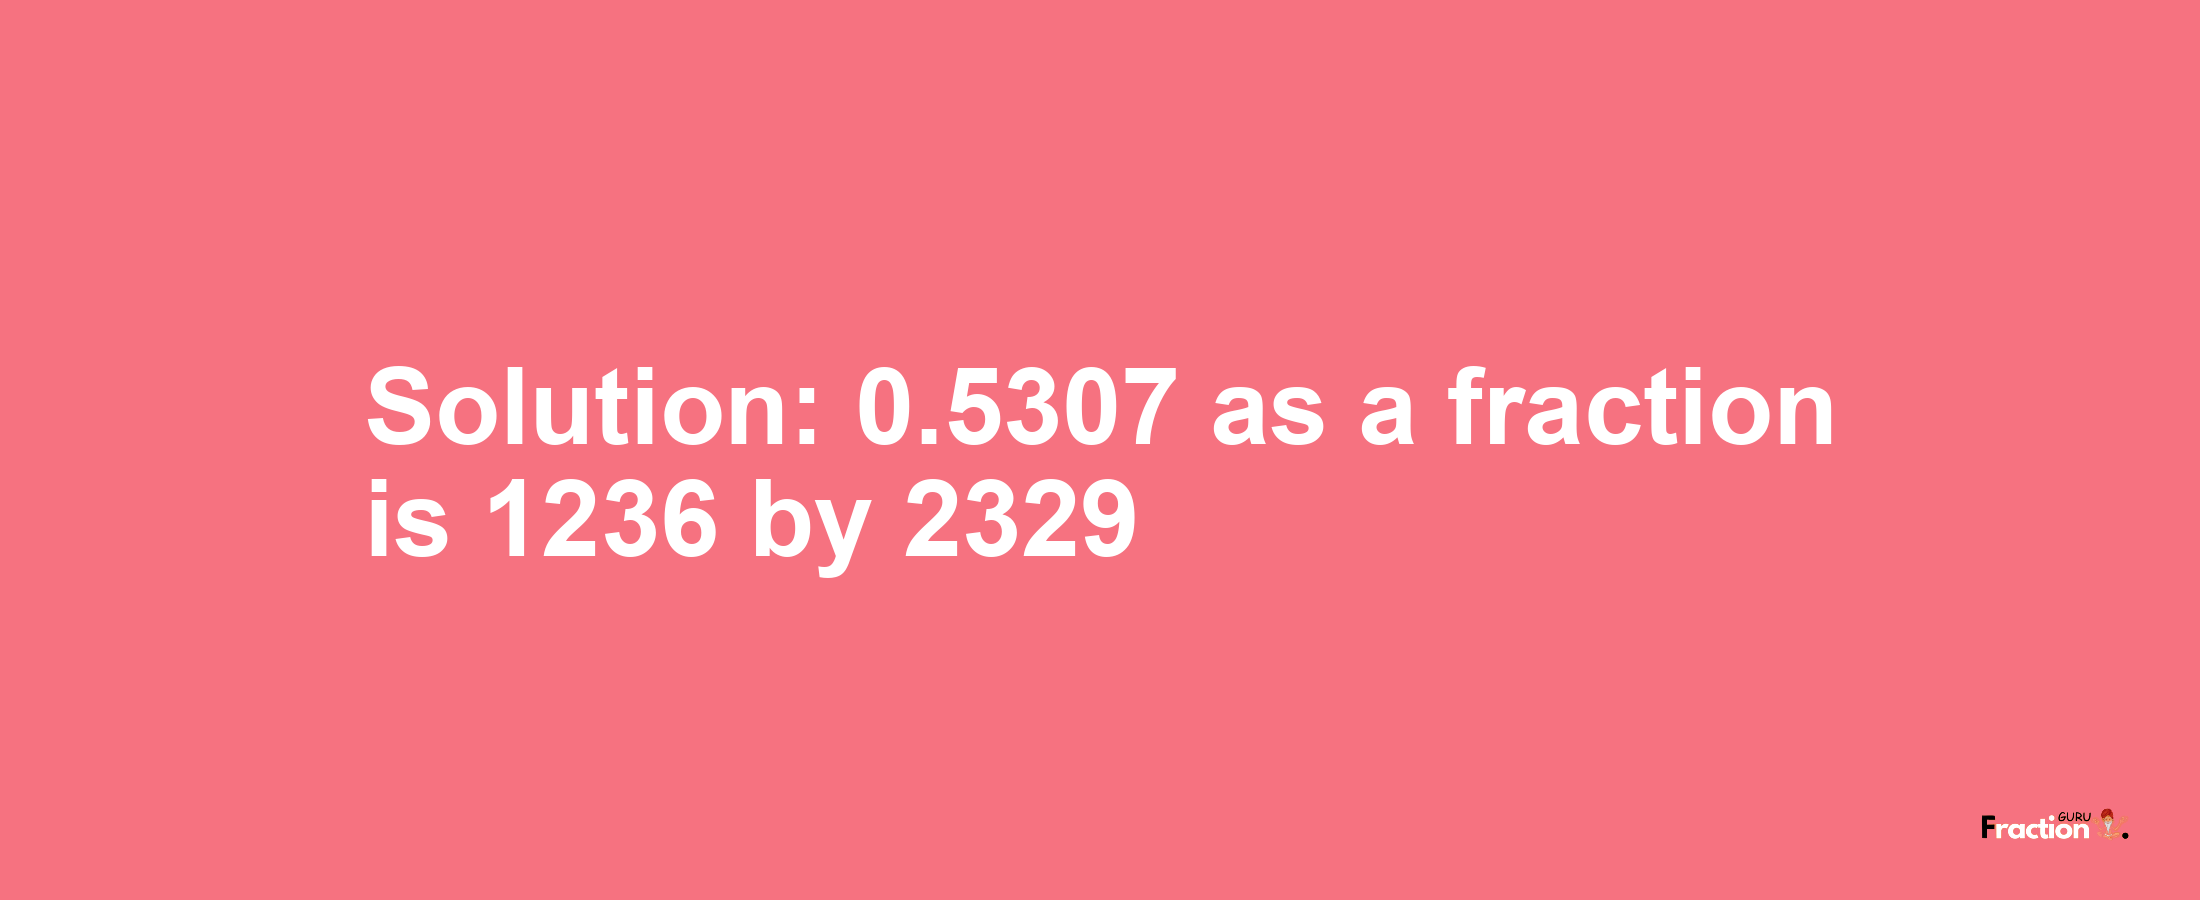 Solution:0.5307 as a fraction is 1236/2329